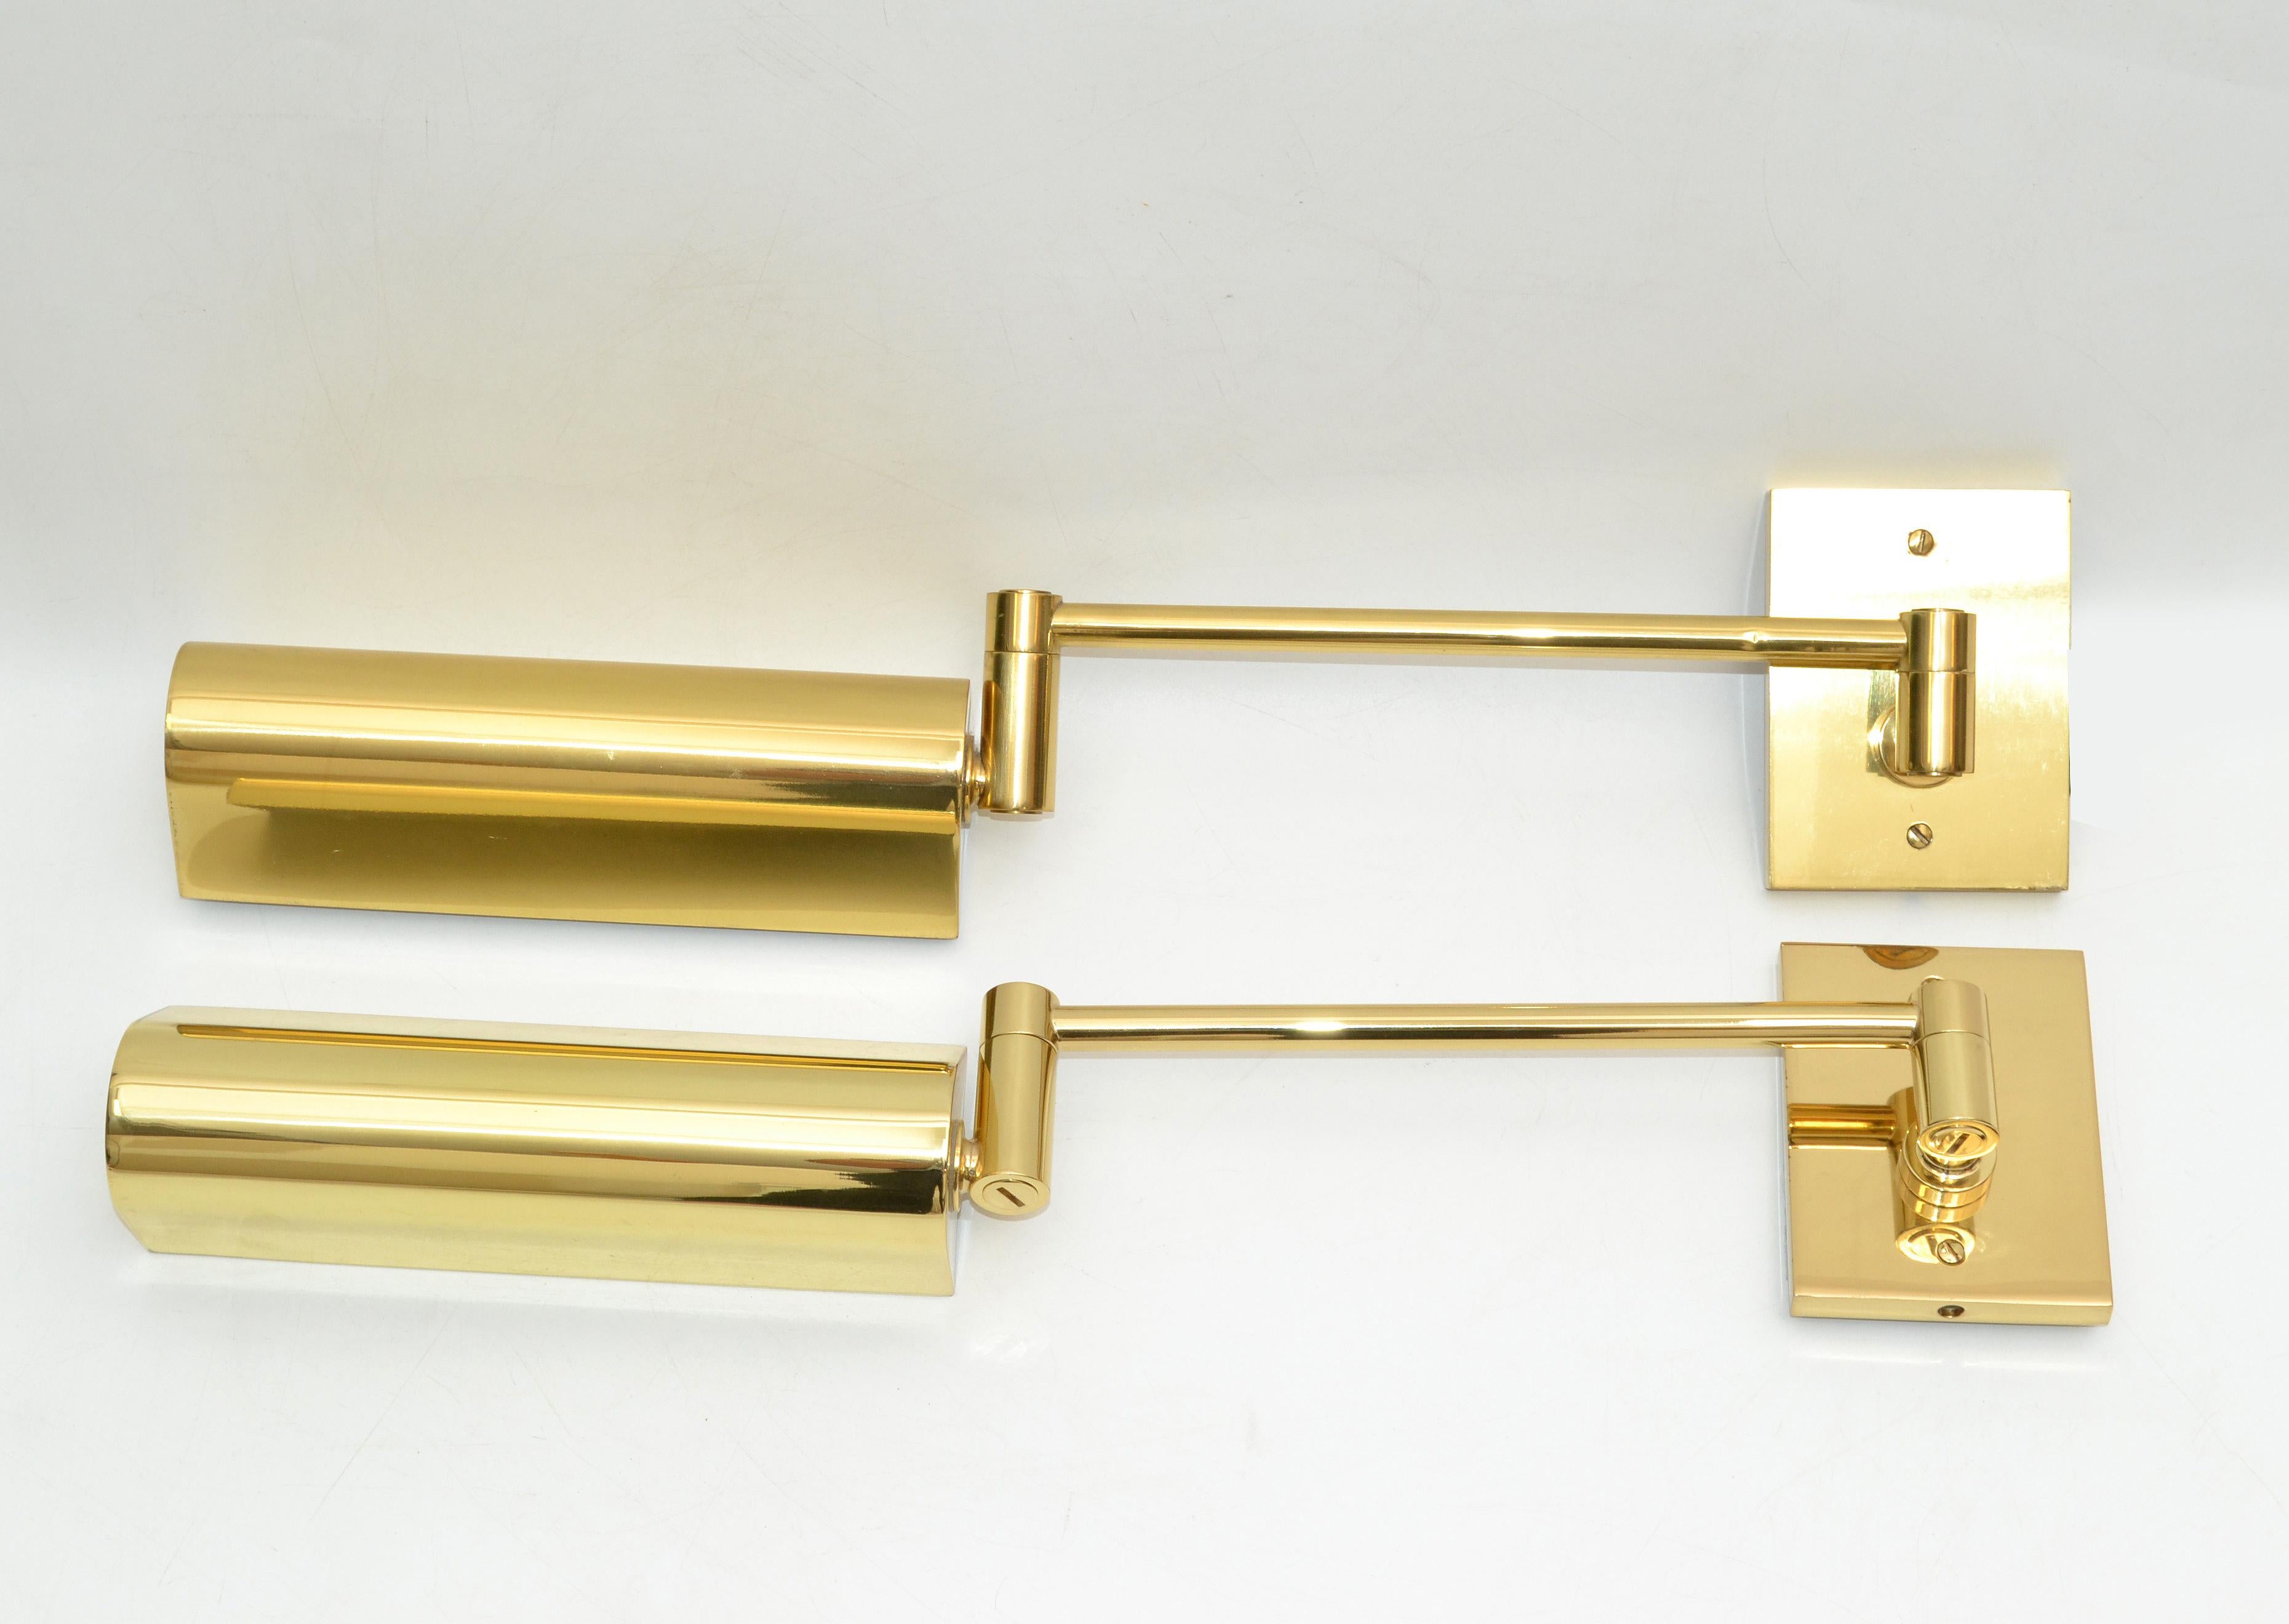 Hansen Retractable Brass & Metal Sconces Lamps Metalarte Spain Wall Lights Pair In Good Condition For Sale In Miami, FL